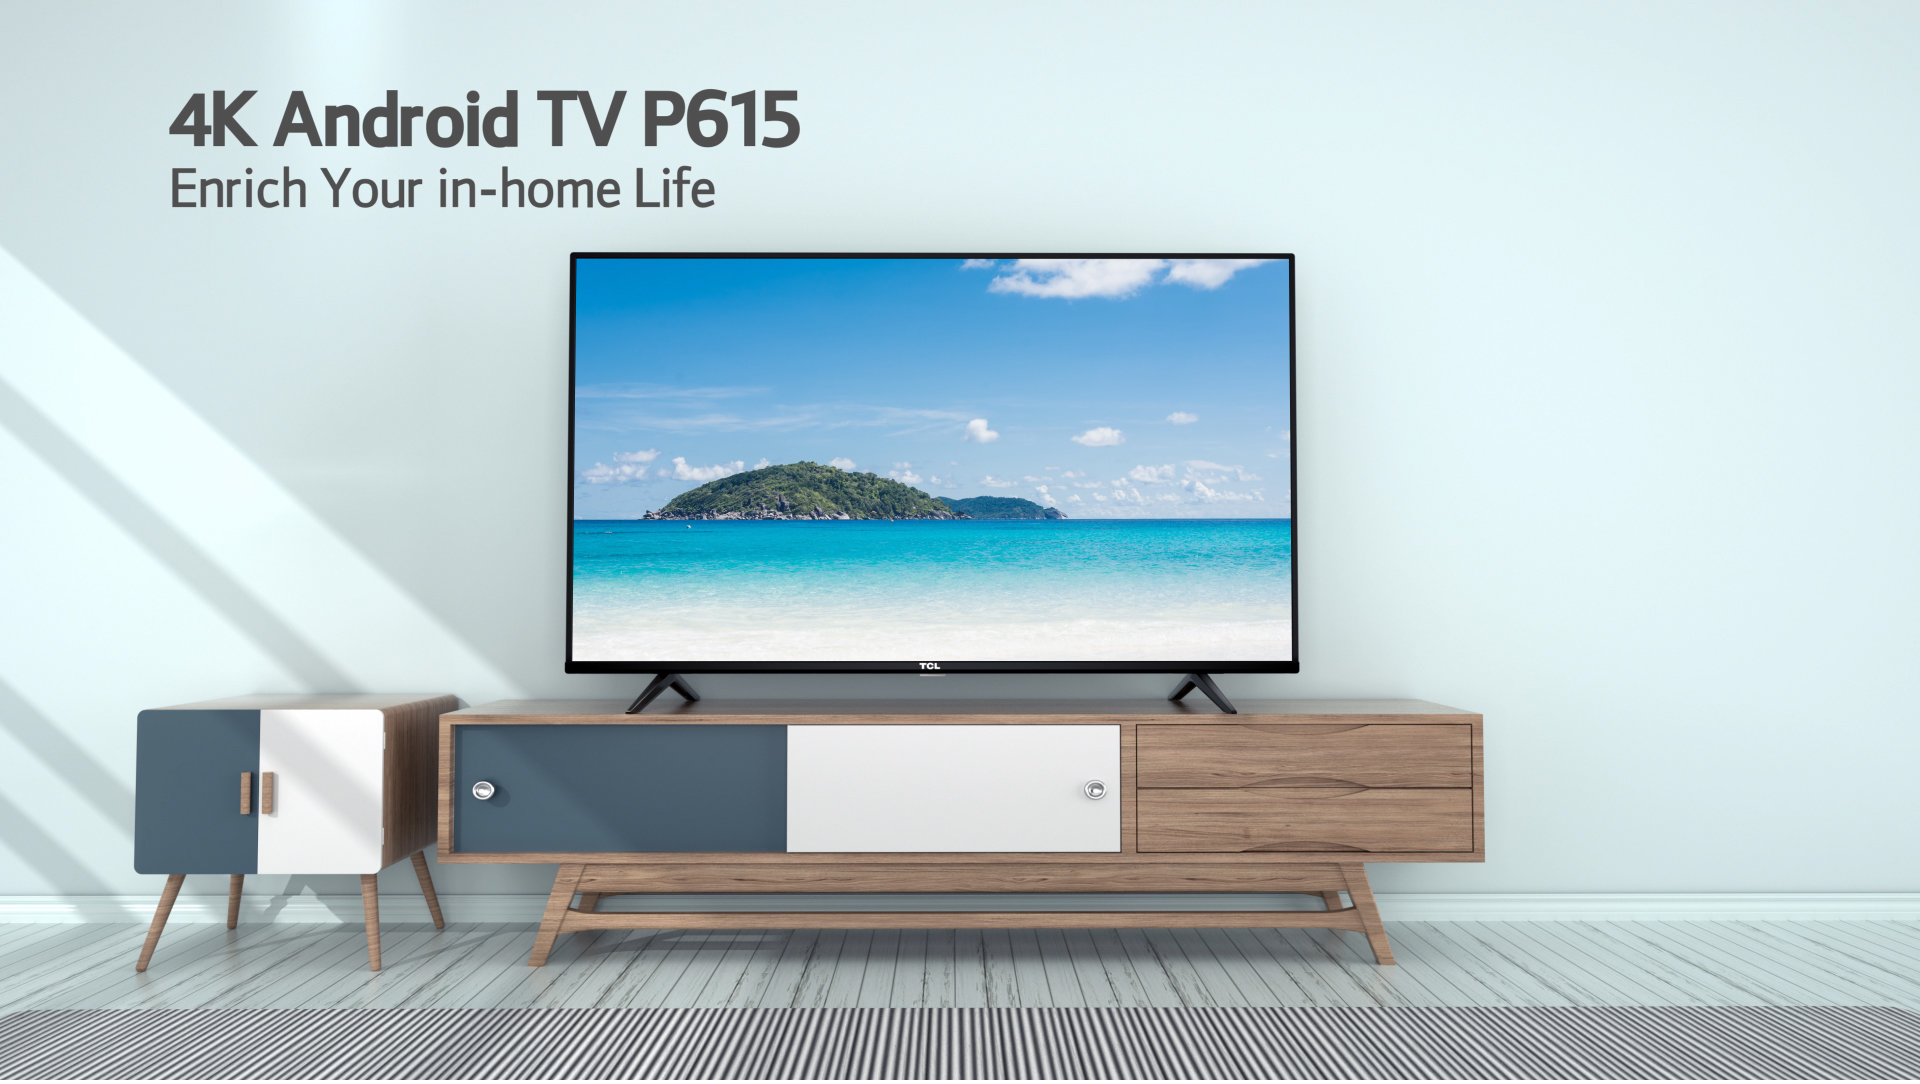 TCL Launched the Latest UHD TV P615 for an Immersive Viewing Experience